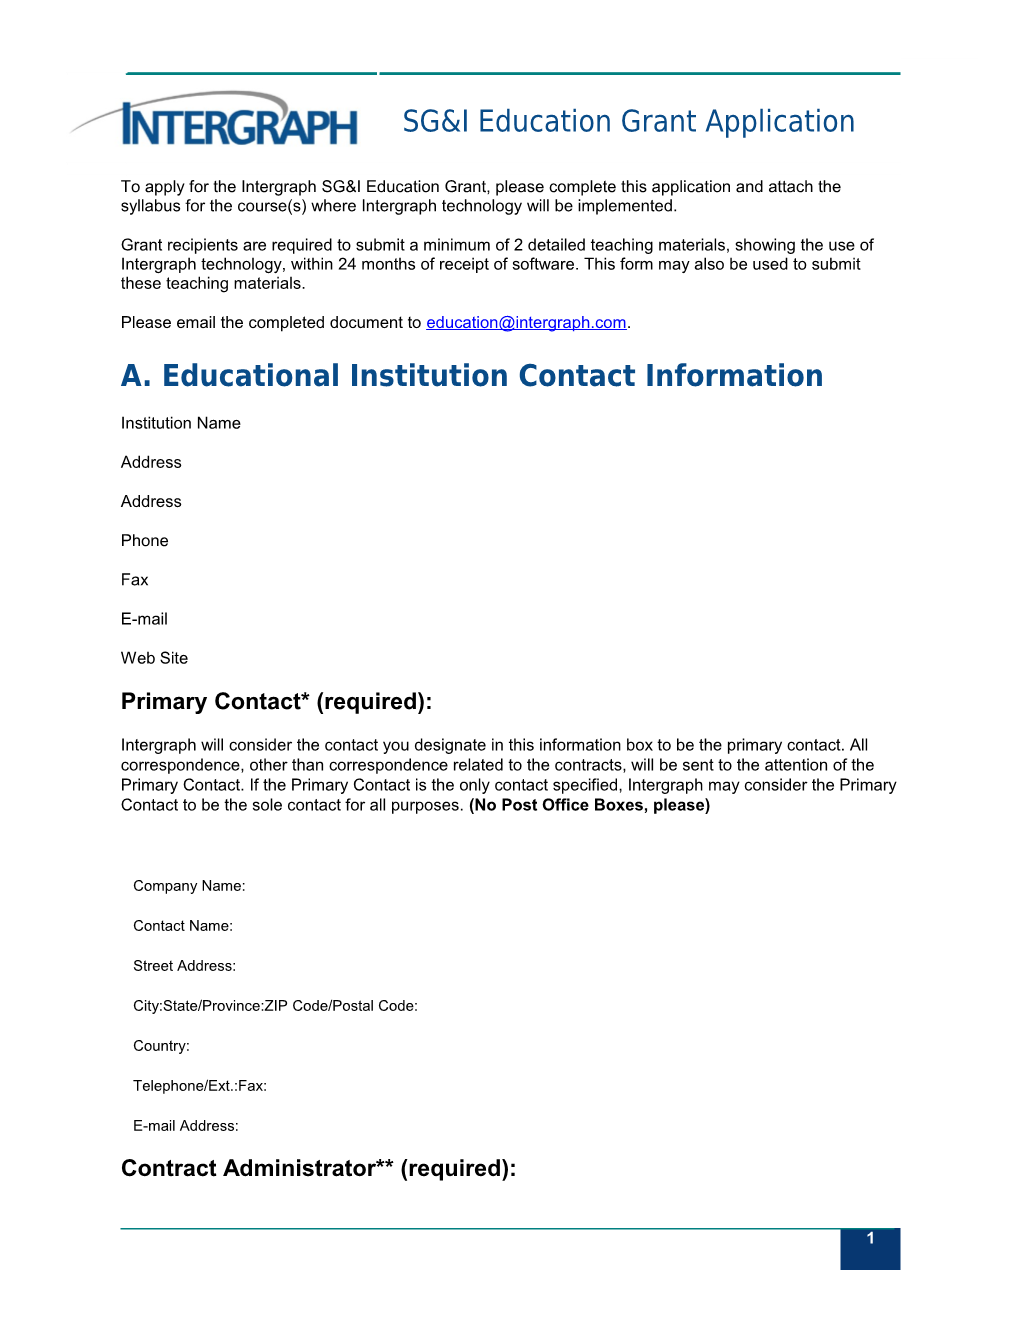 A. Educational Institution Contact Information